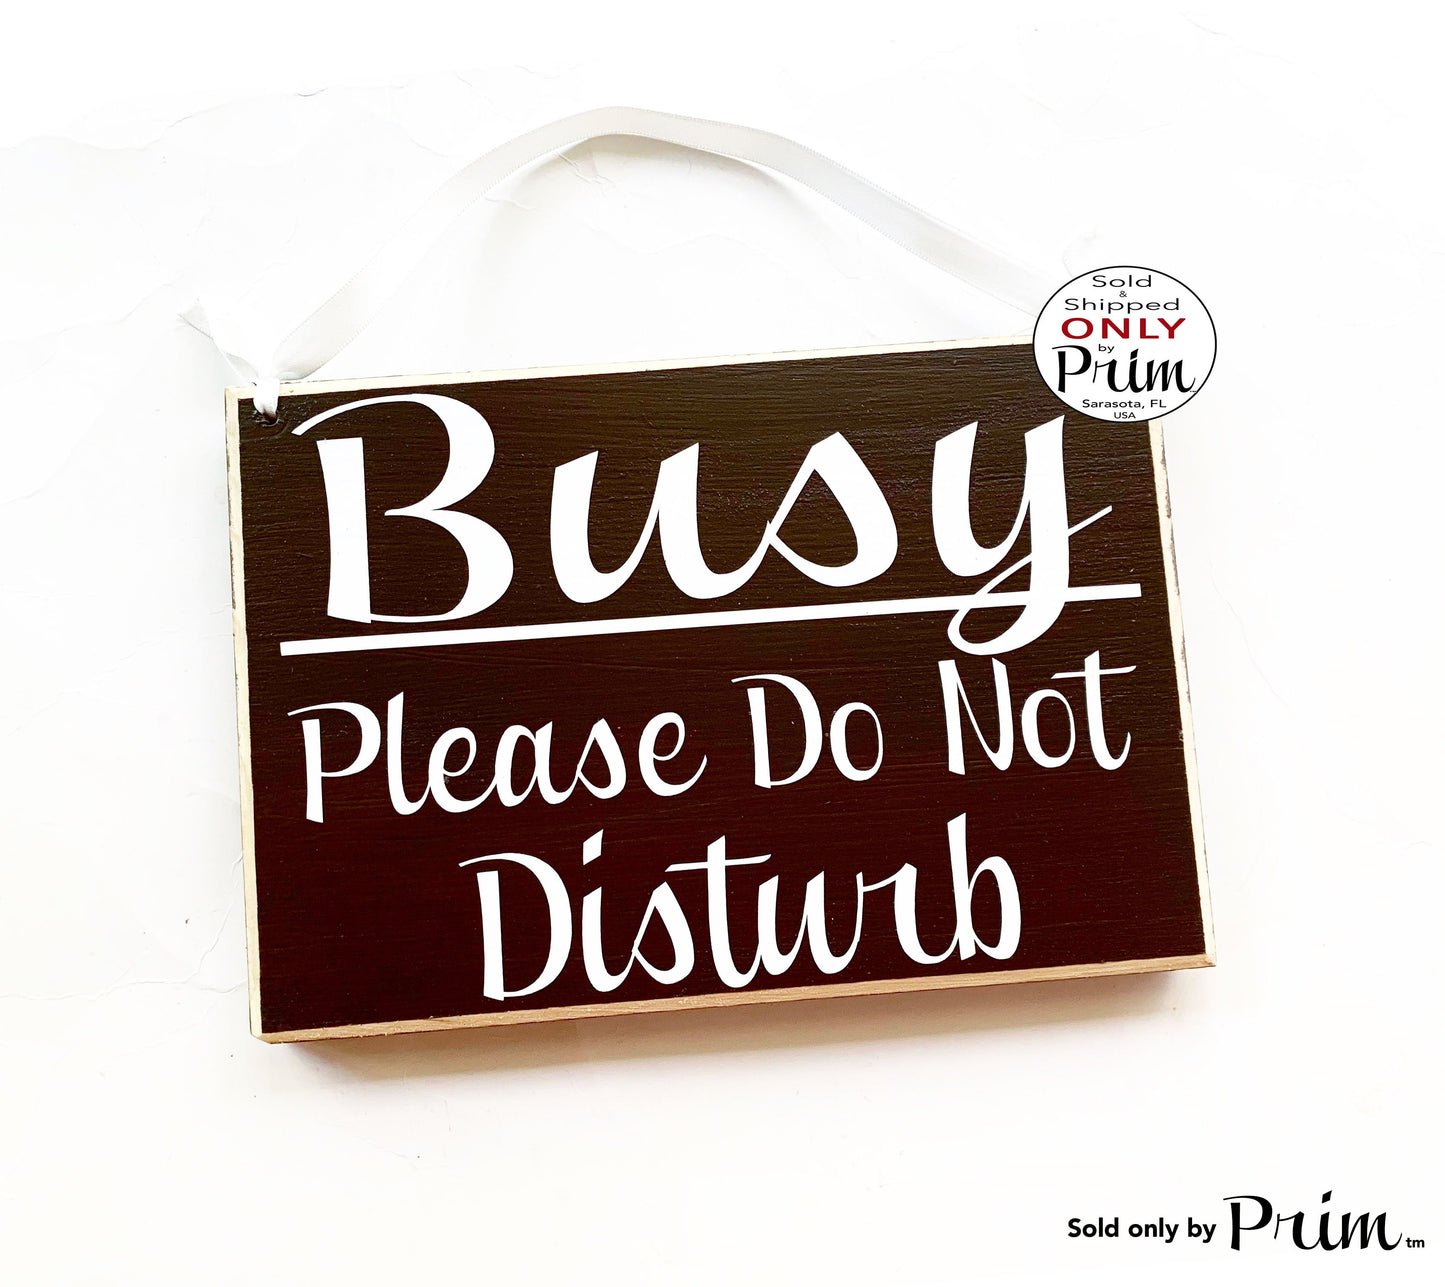 8x6 Busy Please Do Not Disturb Custom Wood Sign In Session Progress Welcome Meeting Quiet Work Cubicle Office Conference Wall Door Plaque